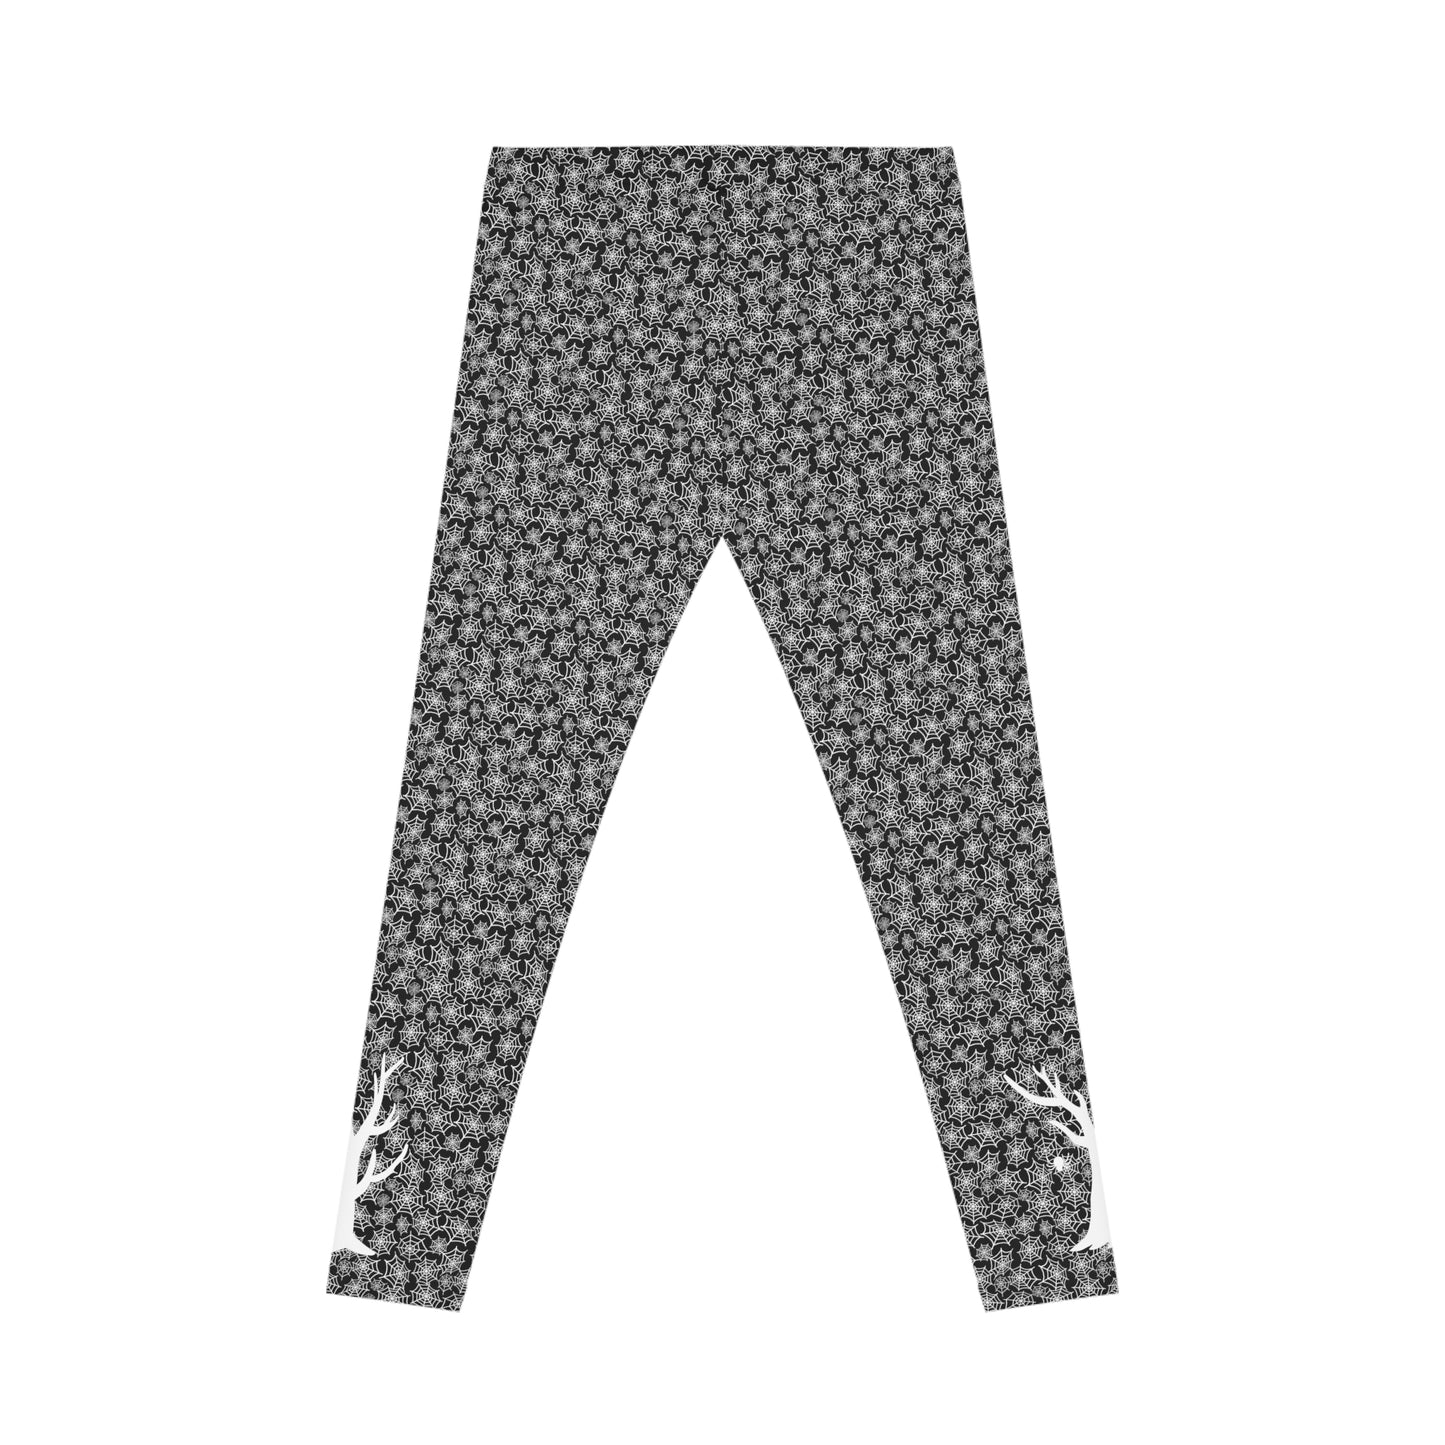 Spiderweb Silhouette Tree Leggings Black with White - Ankle-Length, Mid Waist Fit, Polyester Elastane Blend